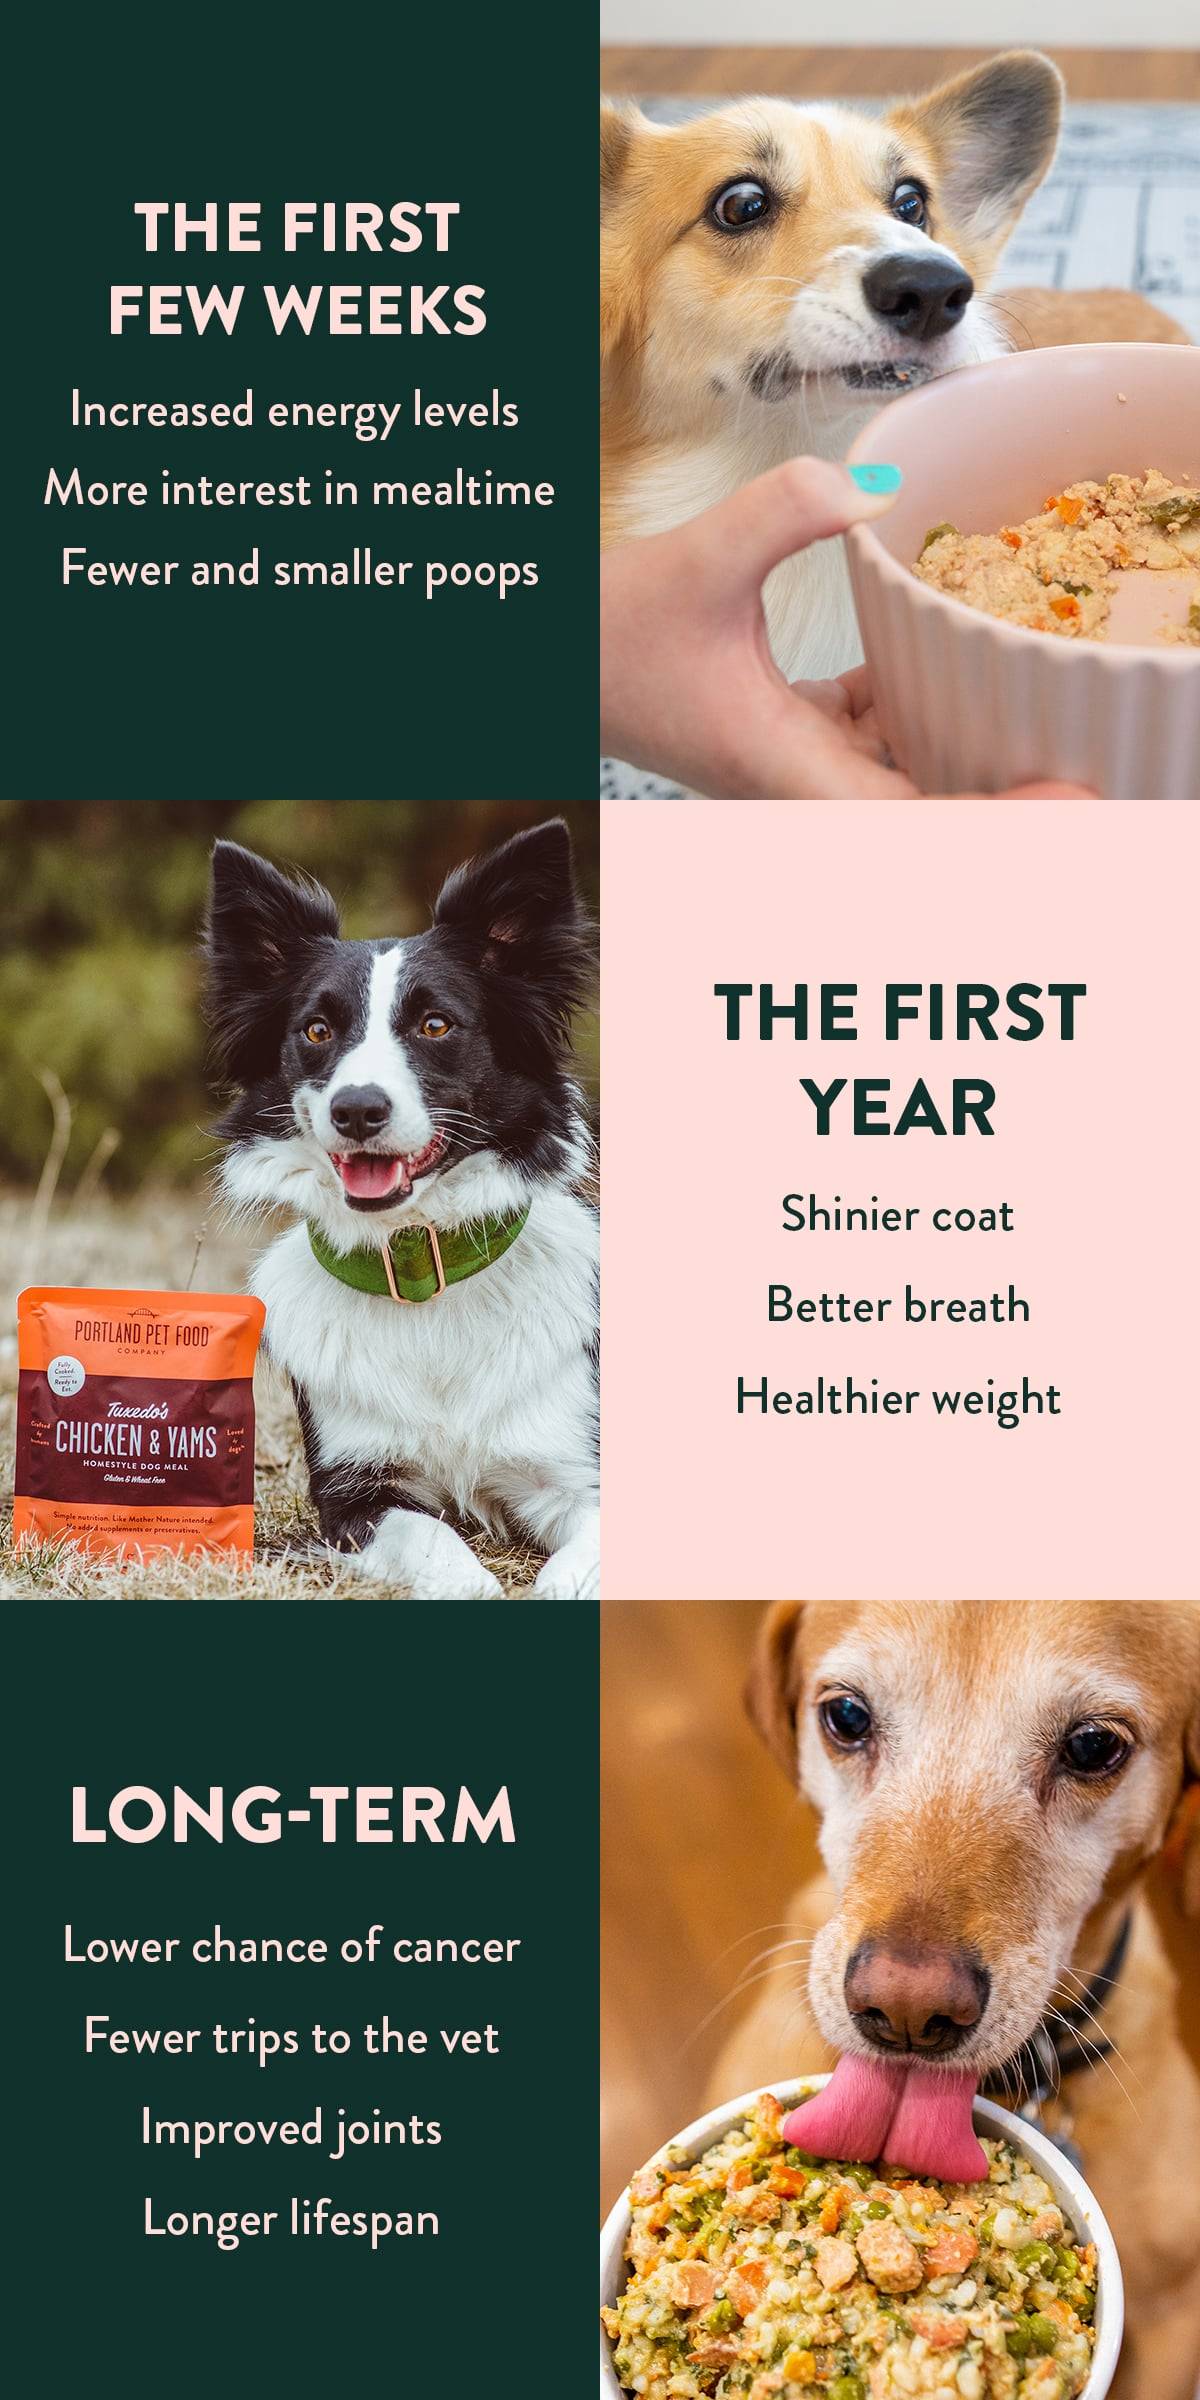 We made the best, fresh dog food that can give their food a natural boost. 